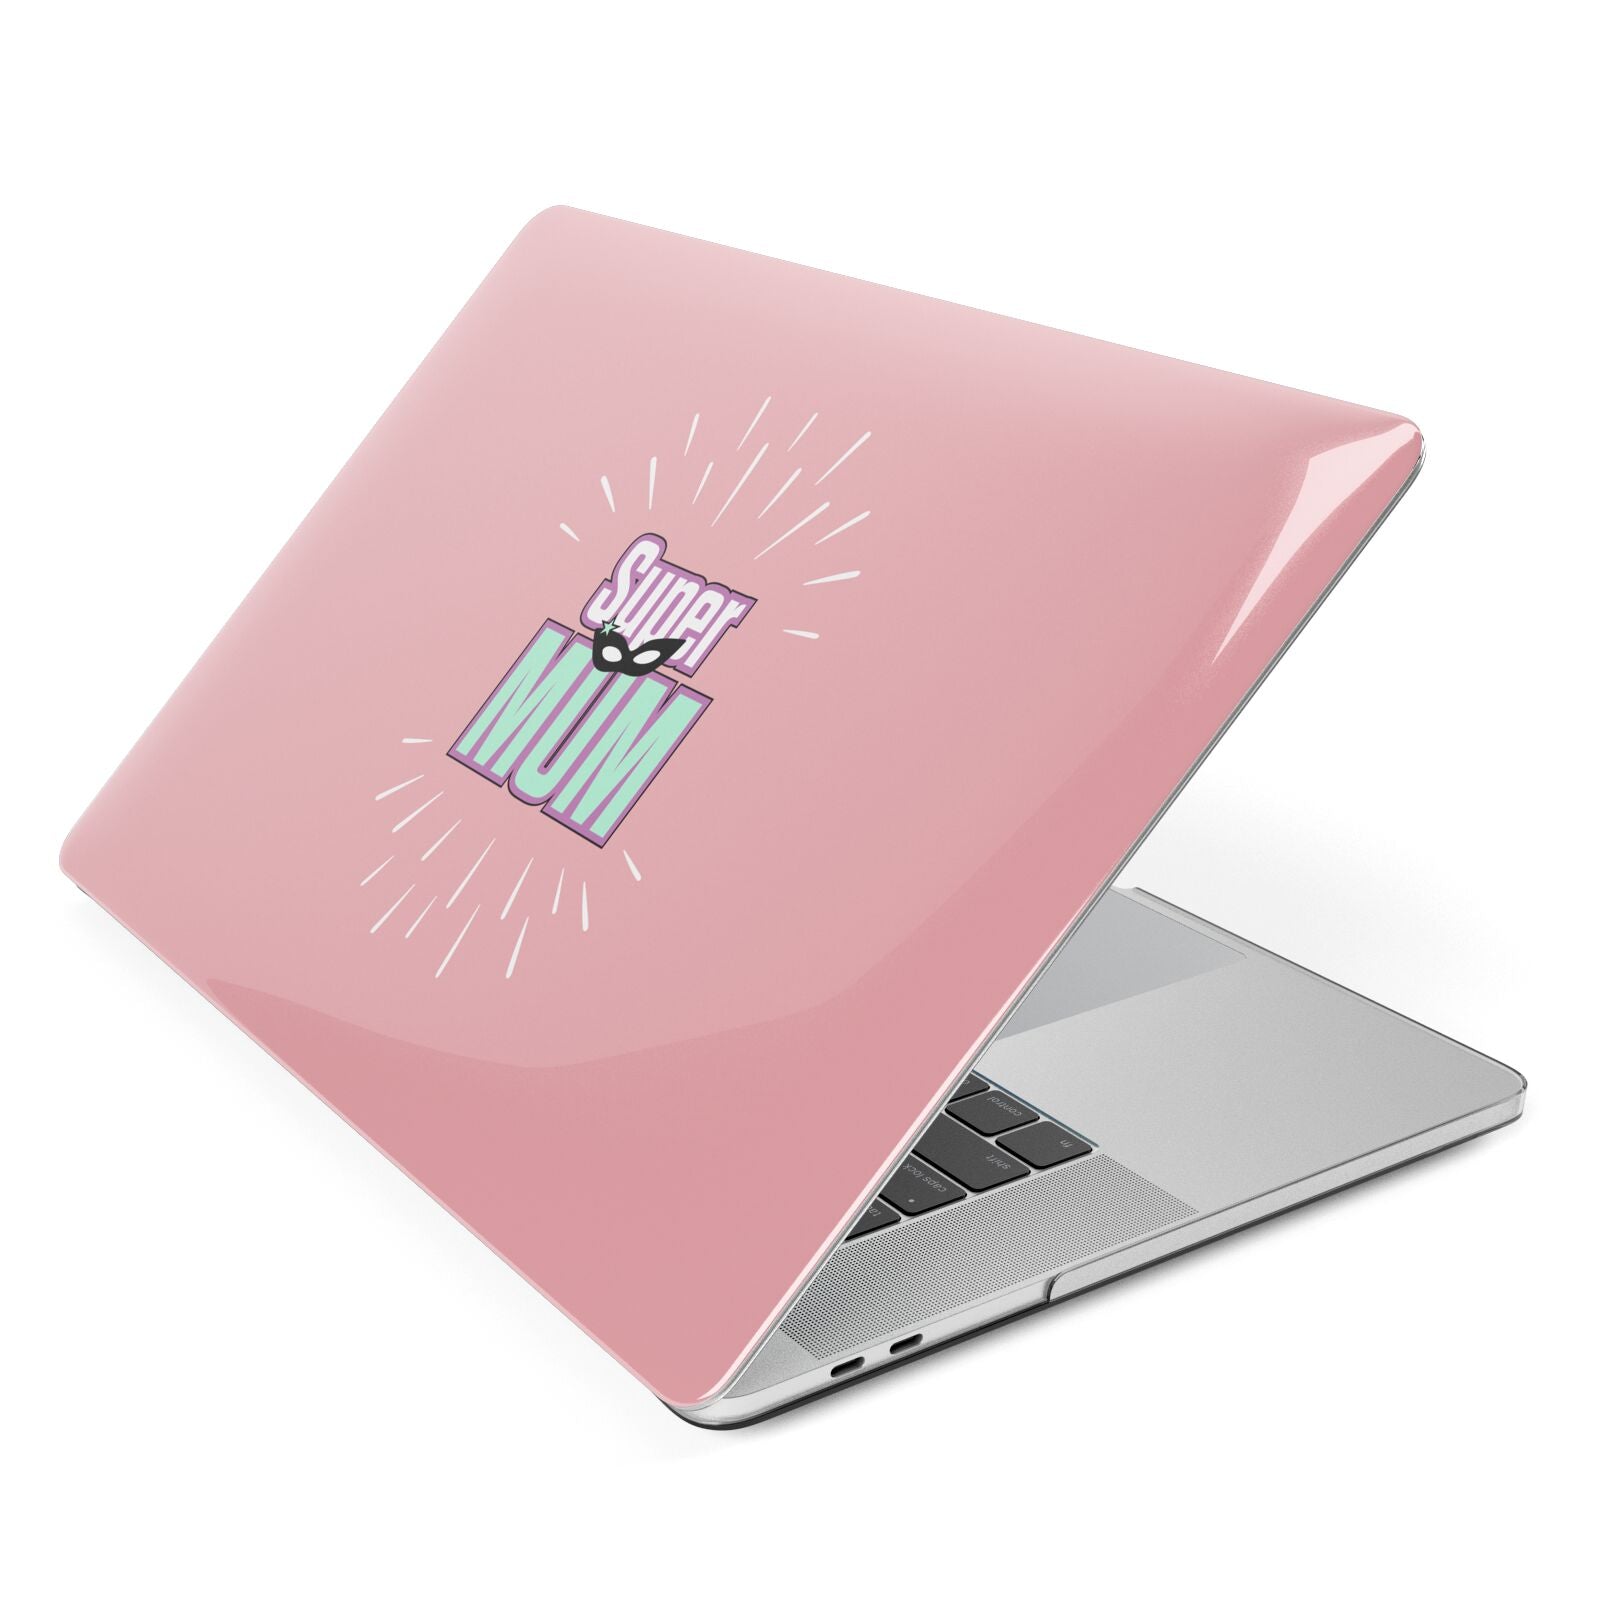 Super Mum Mothers Day Apple MacBook Case Side View